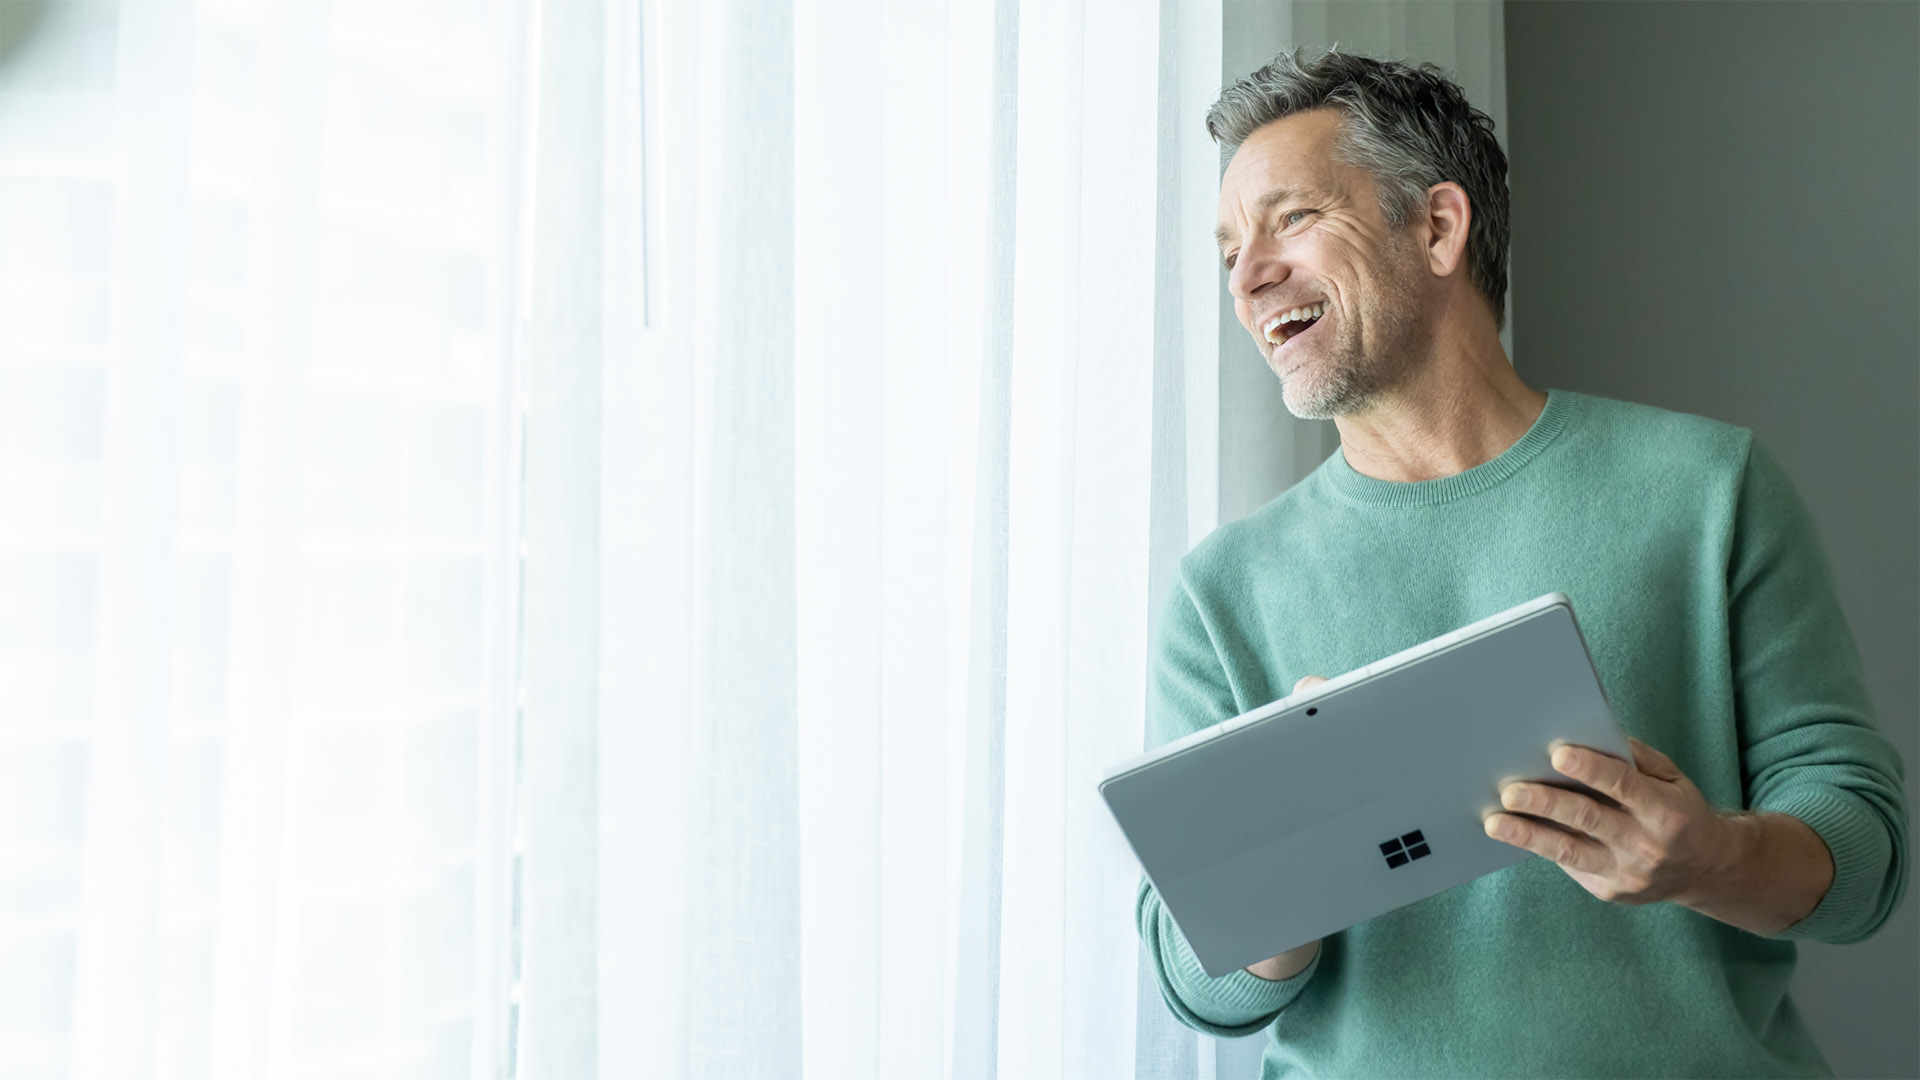 A man standing, smiling and looking out a window while holding a Surface device